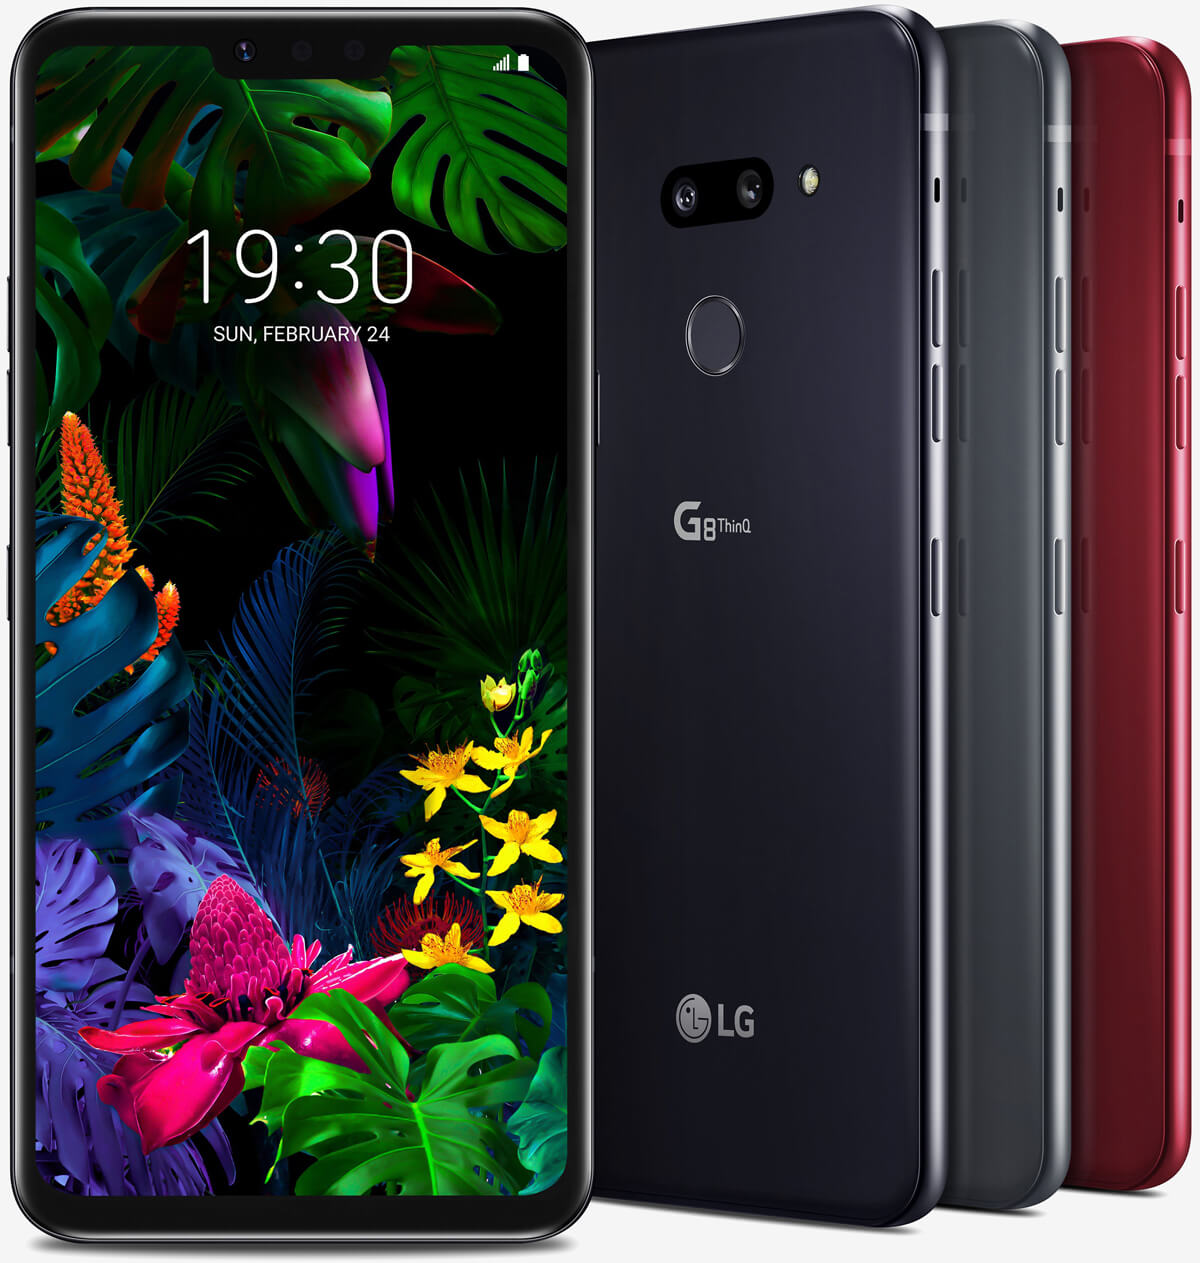 LG G8 ThinQ smartphone with 128GB of storage is $350 off for Prime members